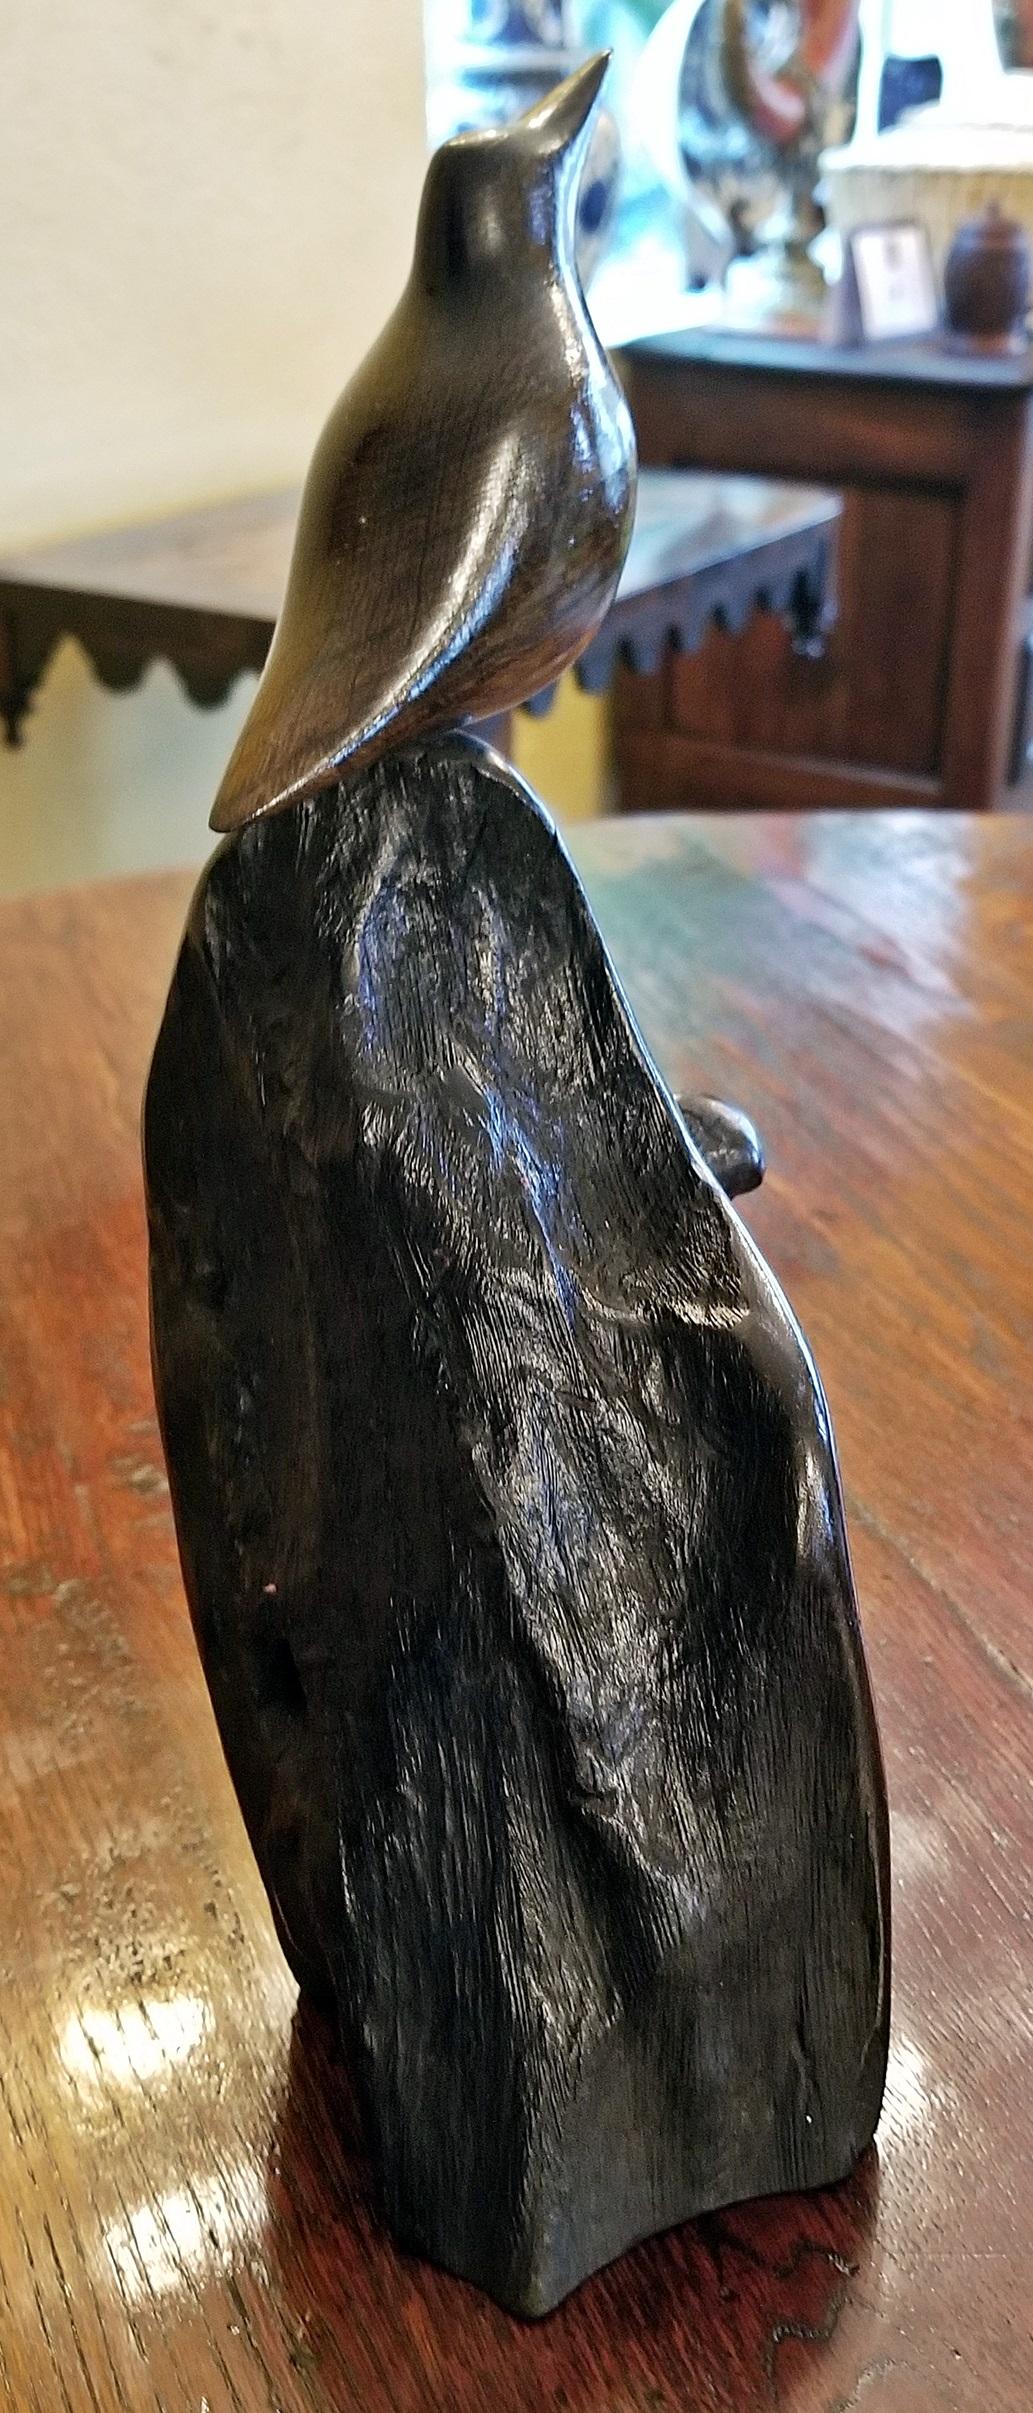 Classic piece of carved Irish Bog Oak…….Bird perching on plinth.

Made in the last 20 years…….but the Bog Oak from which it is carved, is over 5000 years old !!!!!

The center of Ireland is covered in peat bogs……..pre-historic lakes that over